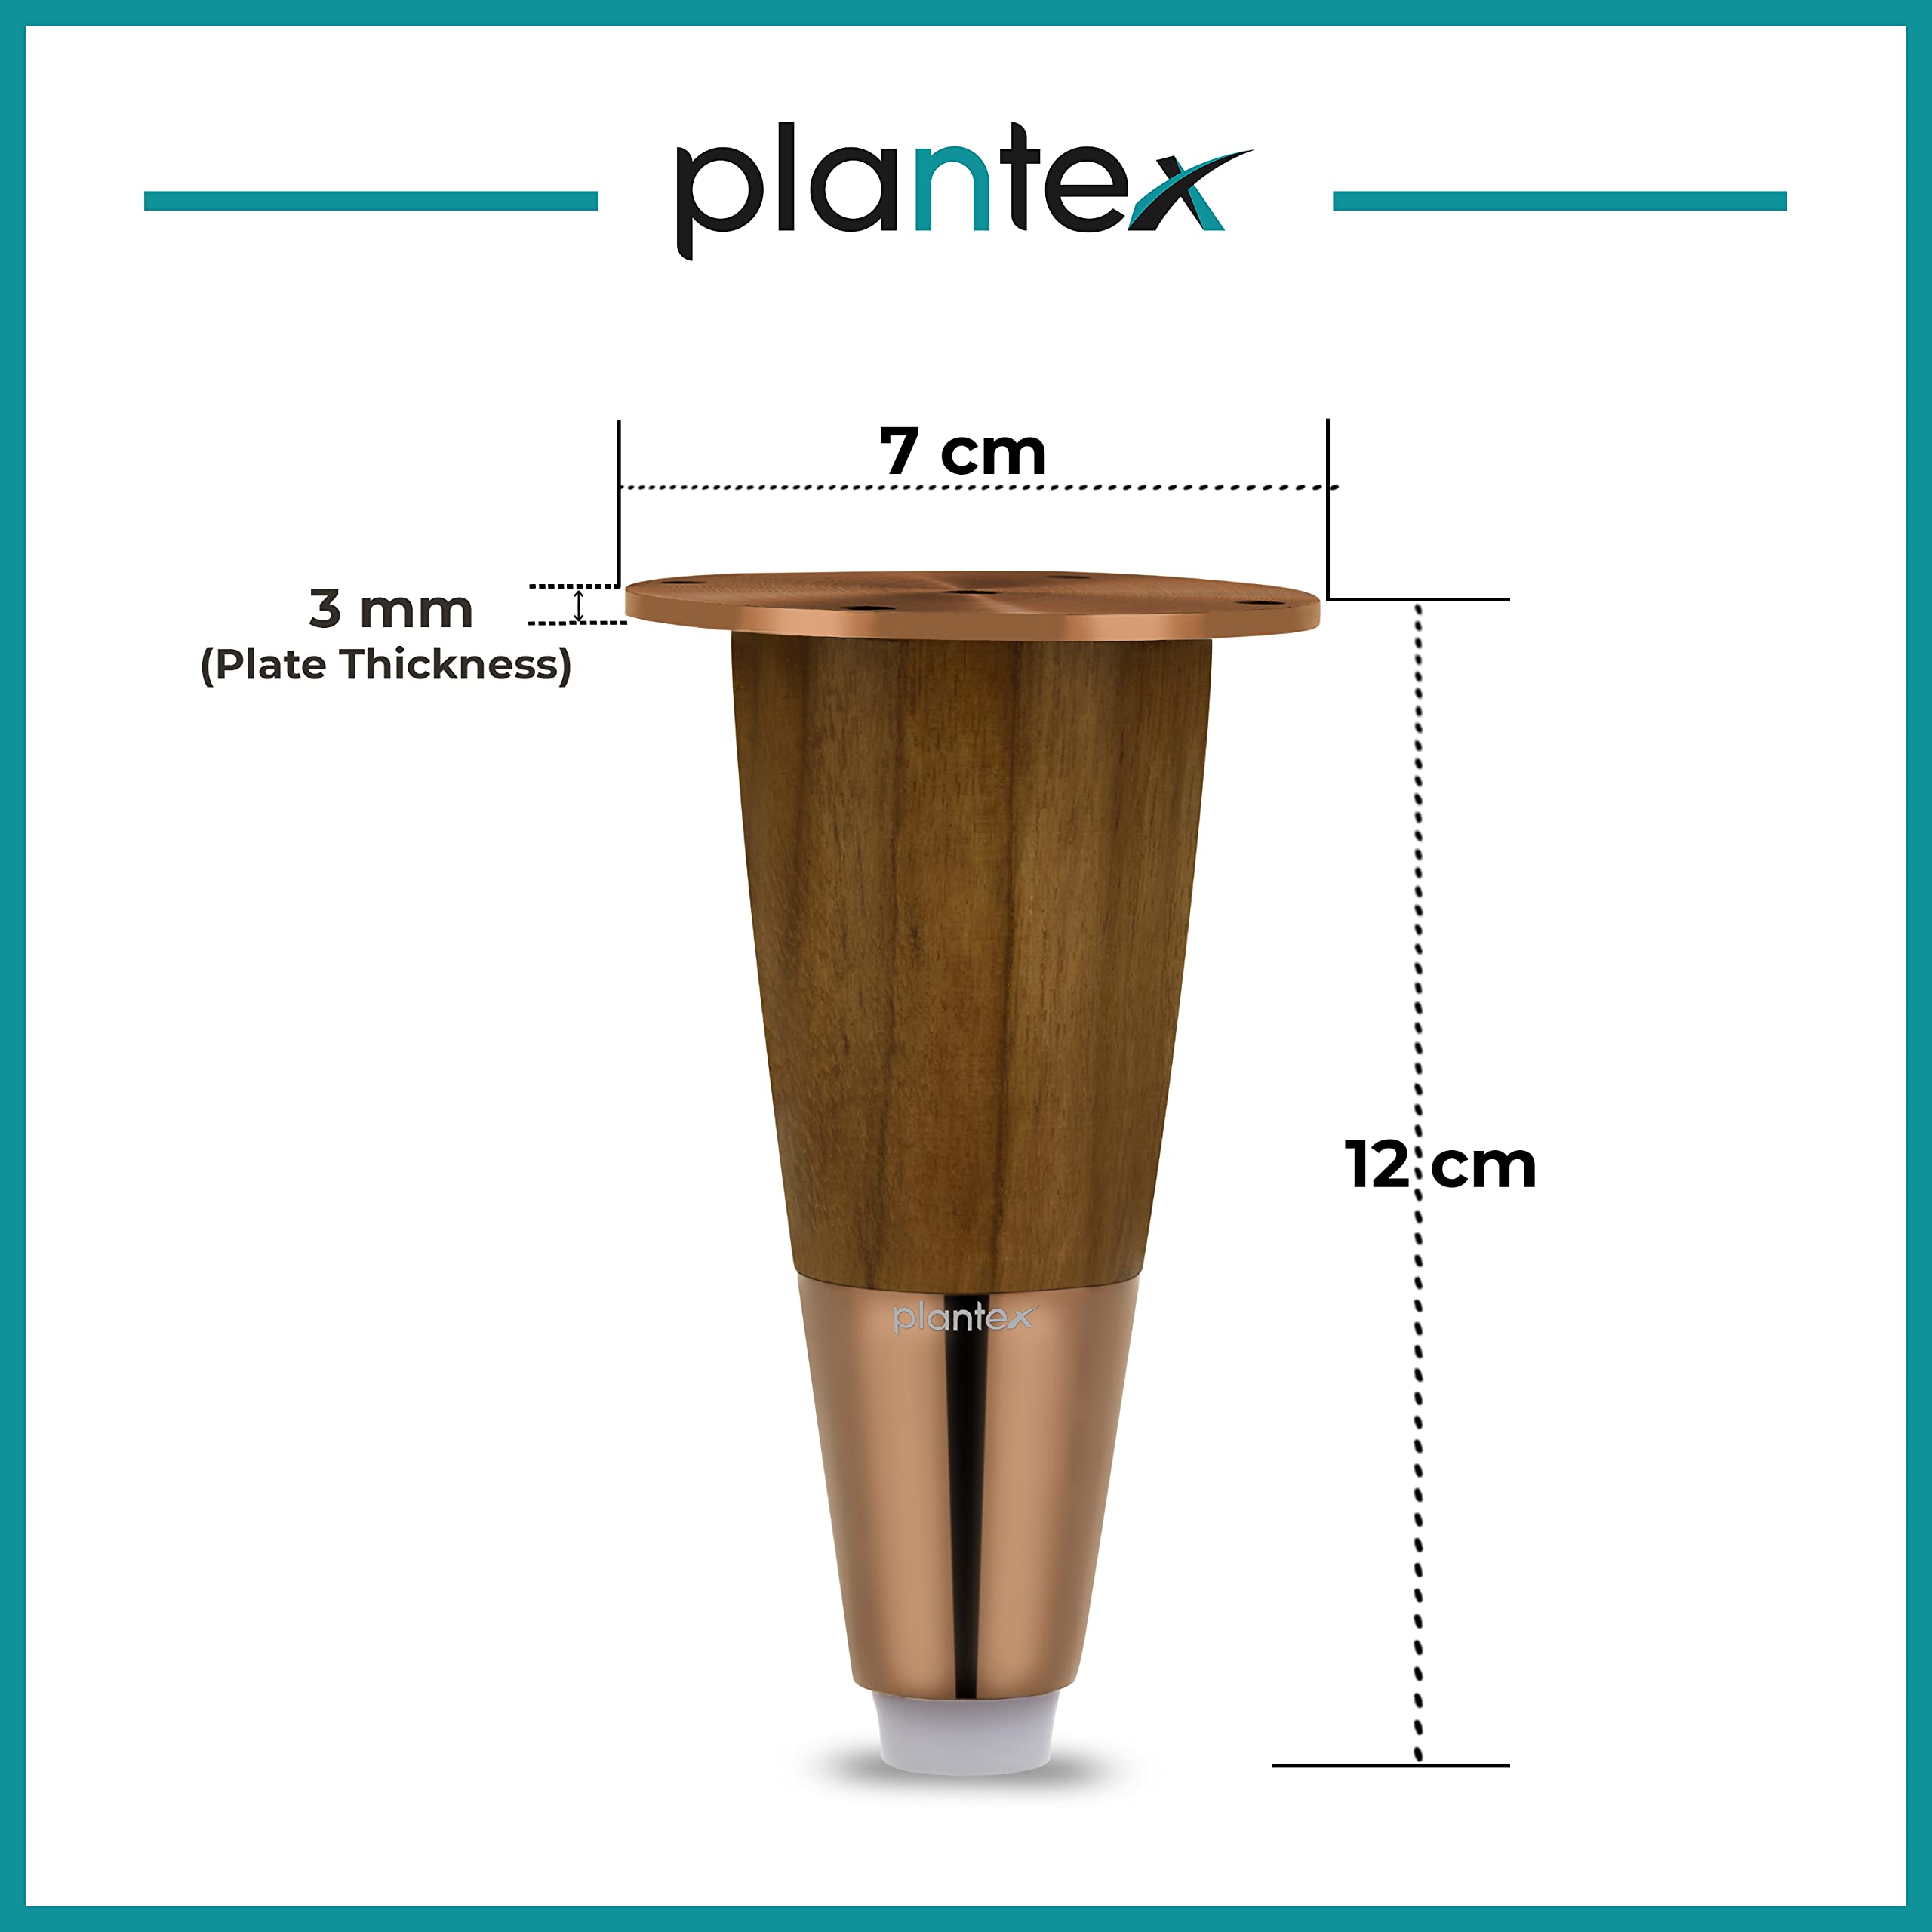 Plantex Stainless Steel and Wood 4 inch Sofa Leg/Bed Furniture Leg Pair for Home Furnitures (DTS-55-PVD Rose Gold) – 4 Pcs